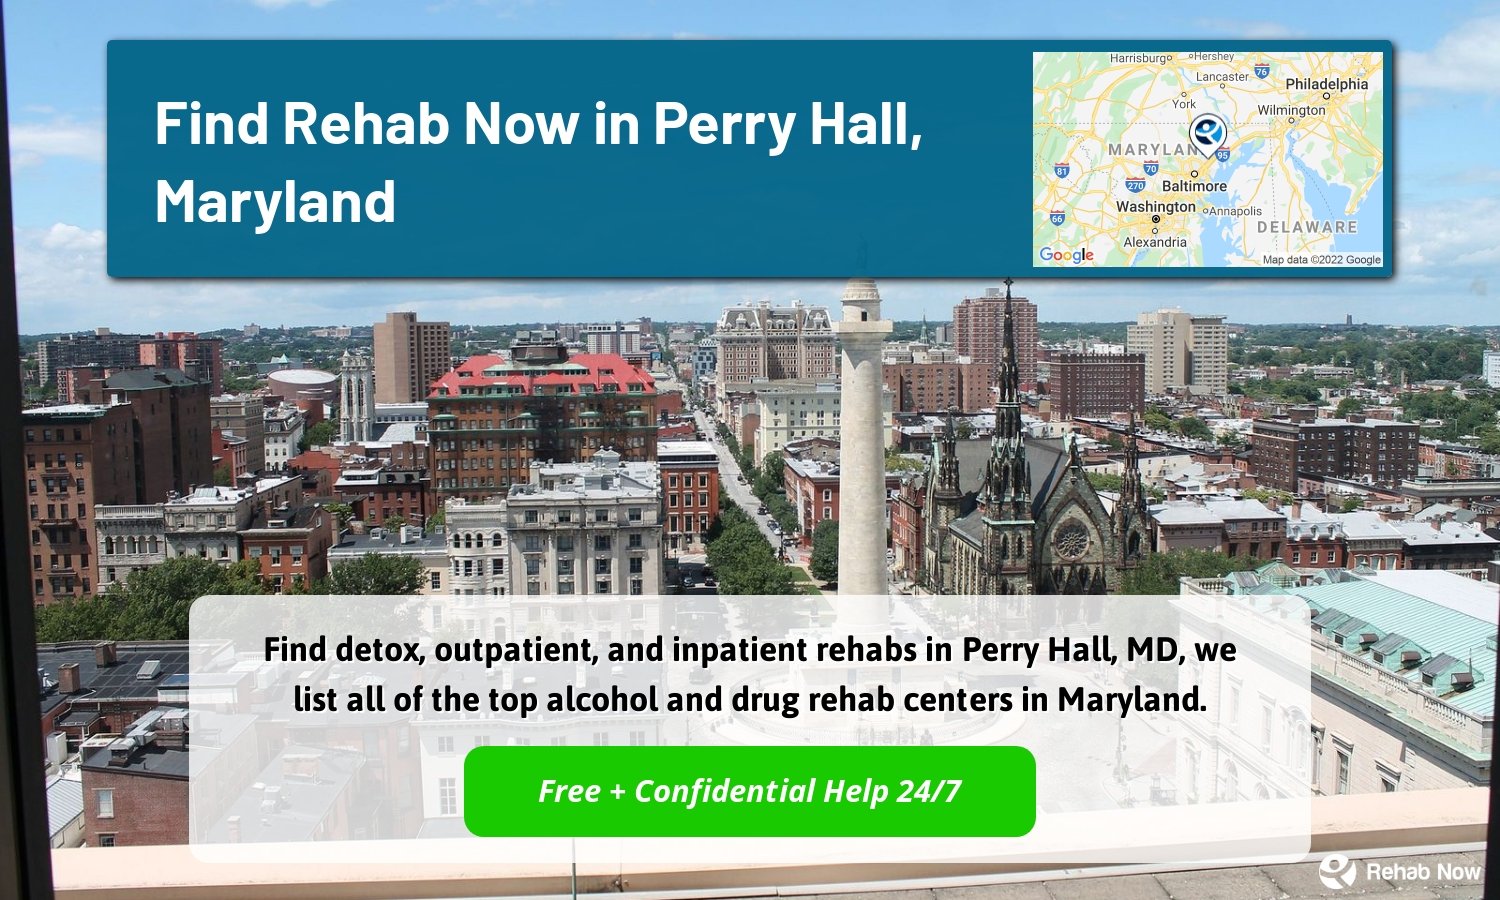 Find detox, outpatient, and inpatient rehabs in Perry Hall, MD, we list all of the top alcohol and drug rehab centers in Maryland.